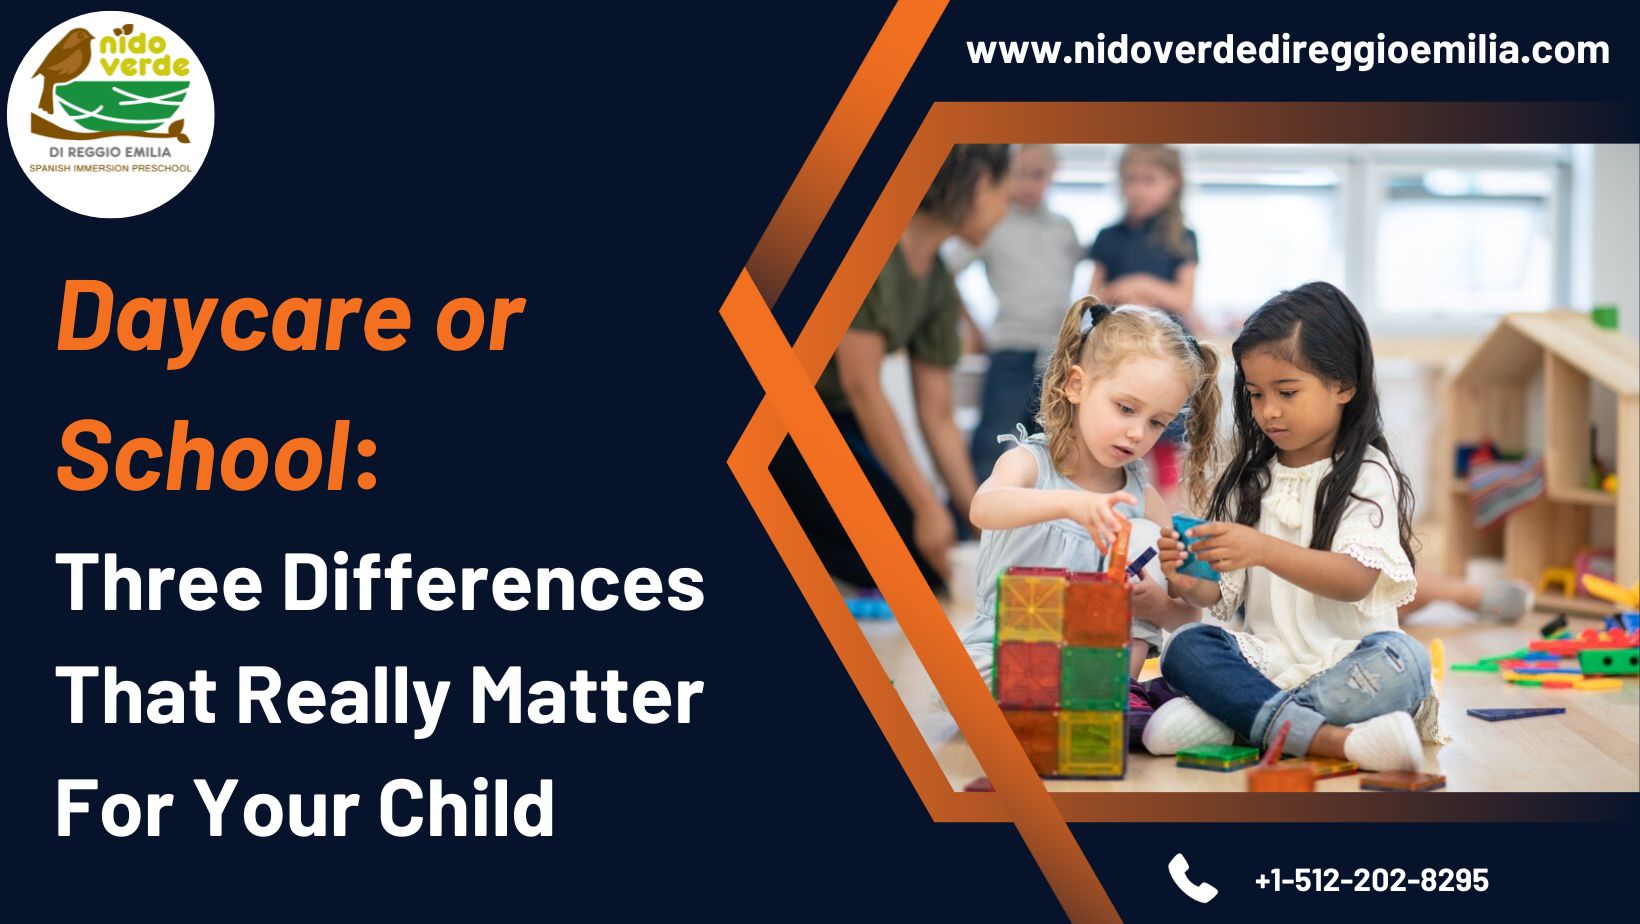 Daycare or School Three Differences That Really Matter For Your Child